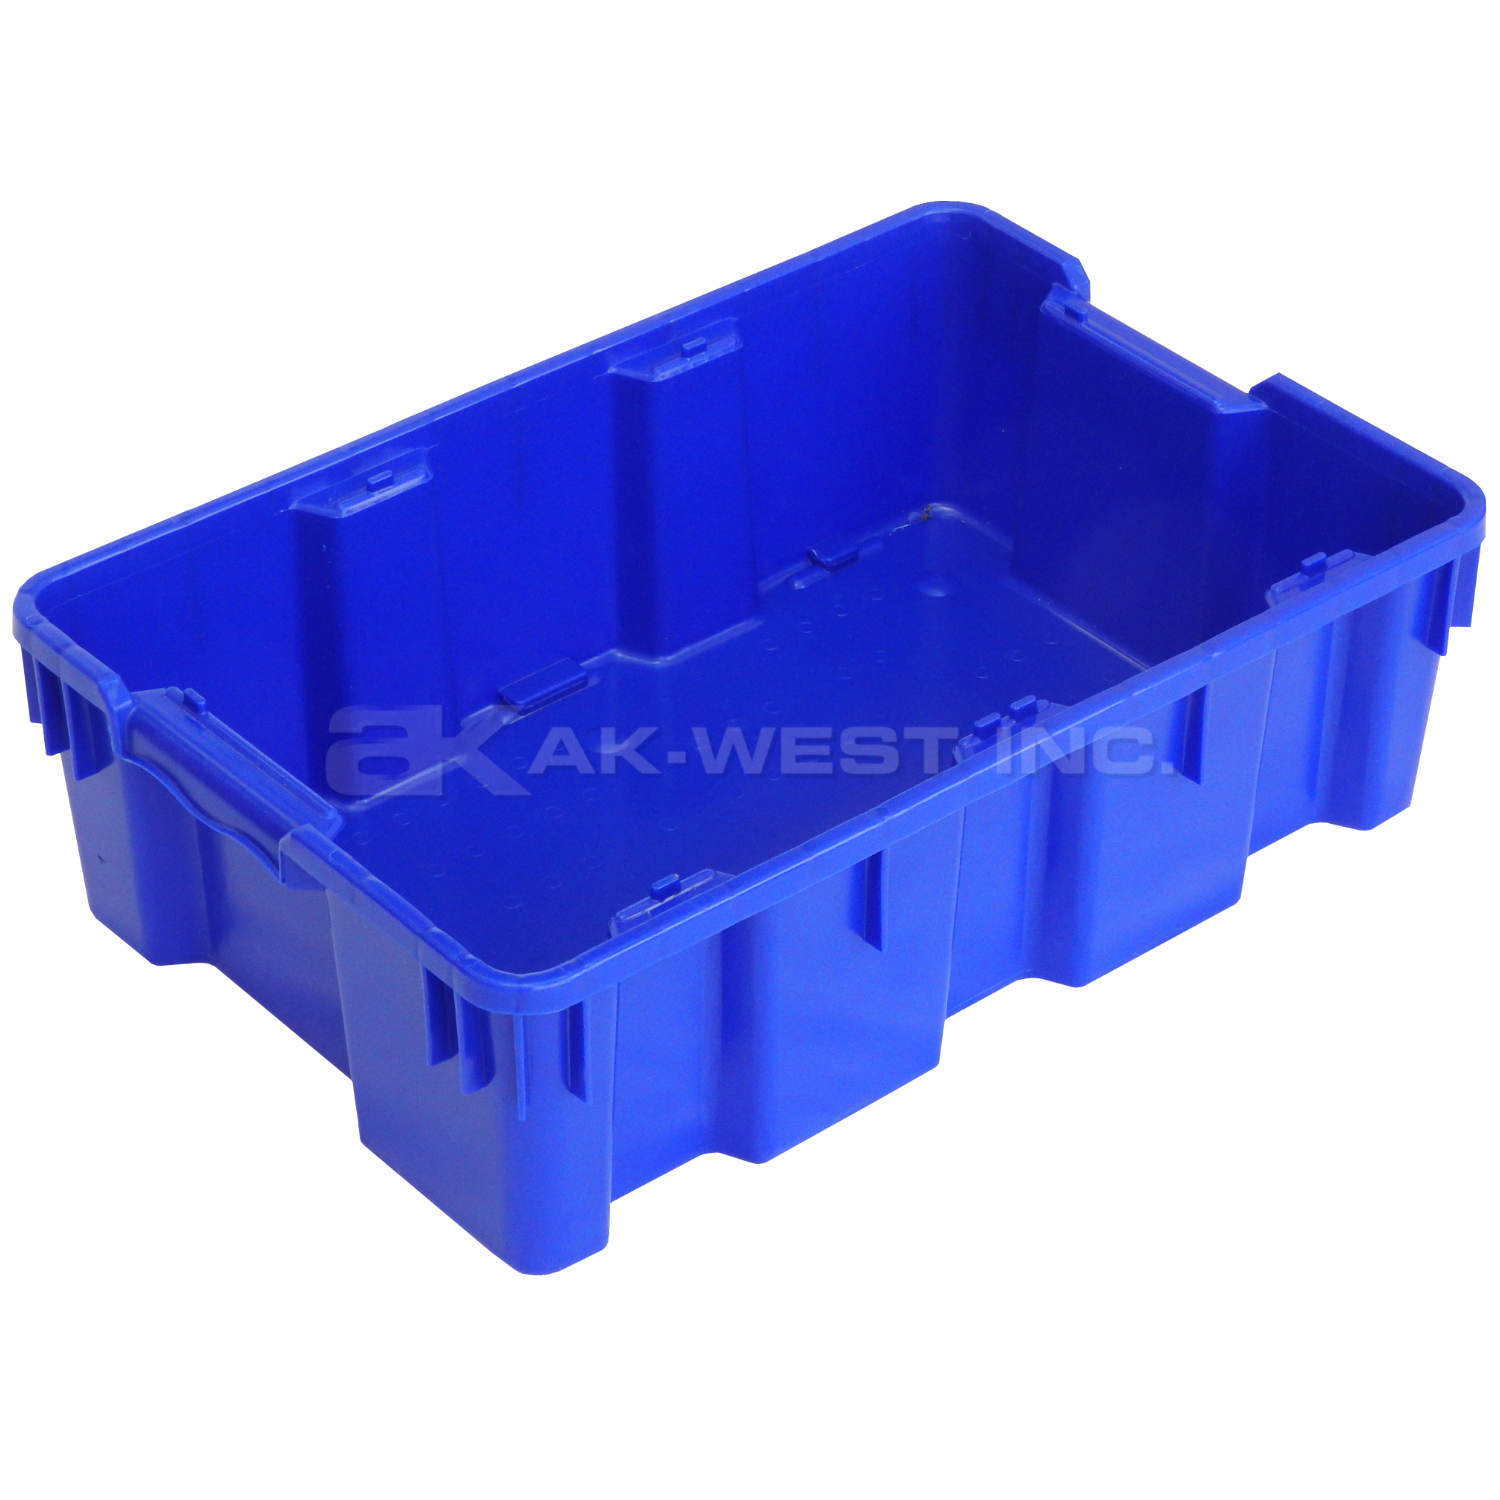 Blue, 24"L x 16"W x 7"H Stack and Nest Container w/ Solid Sides and Base